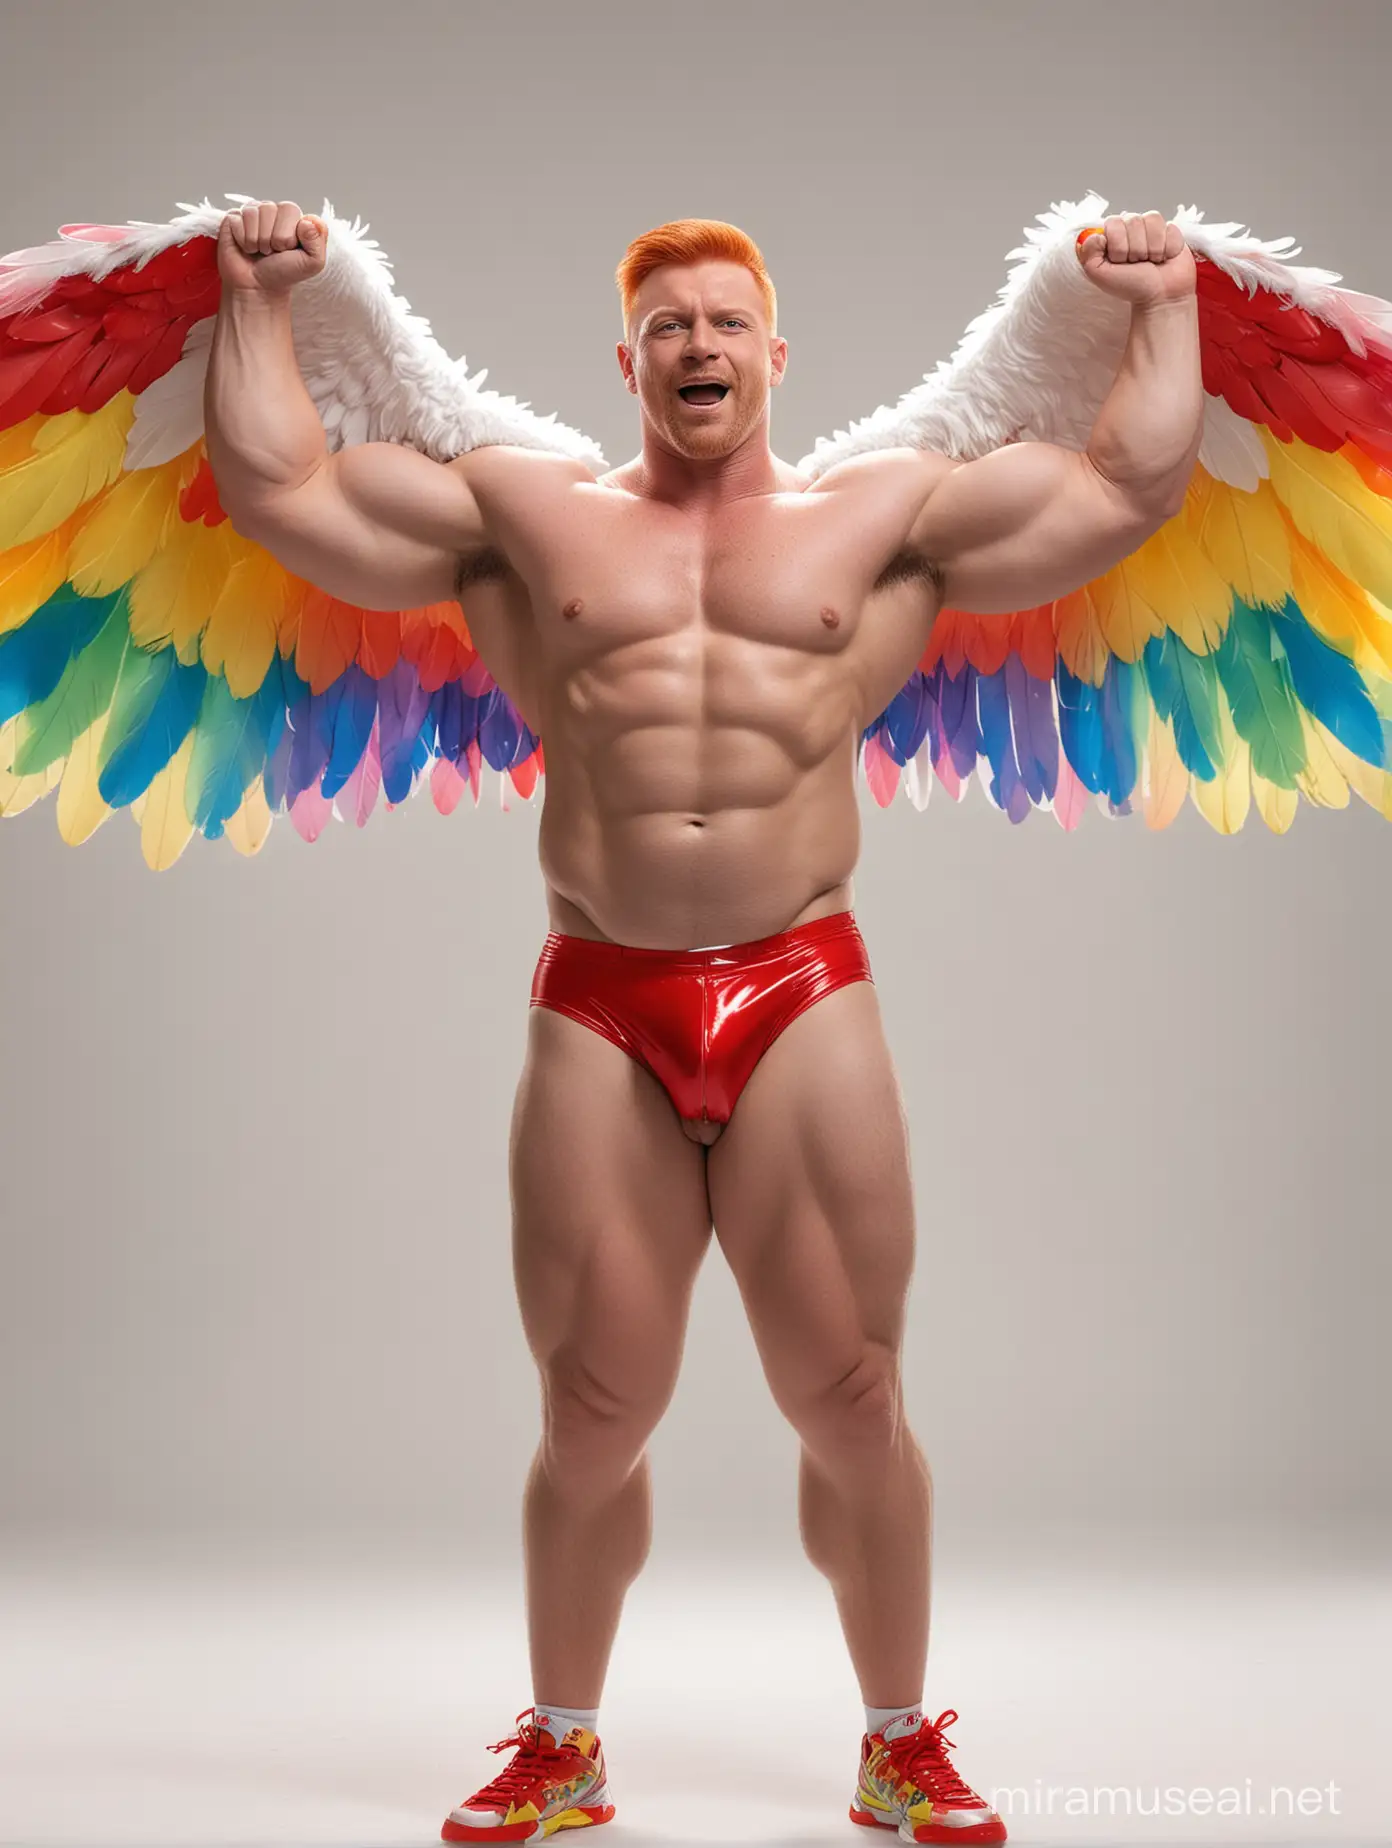 Muscular 30s Bodybuilder Flexing with Colorful Rainbow Eagle Wings Jacket